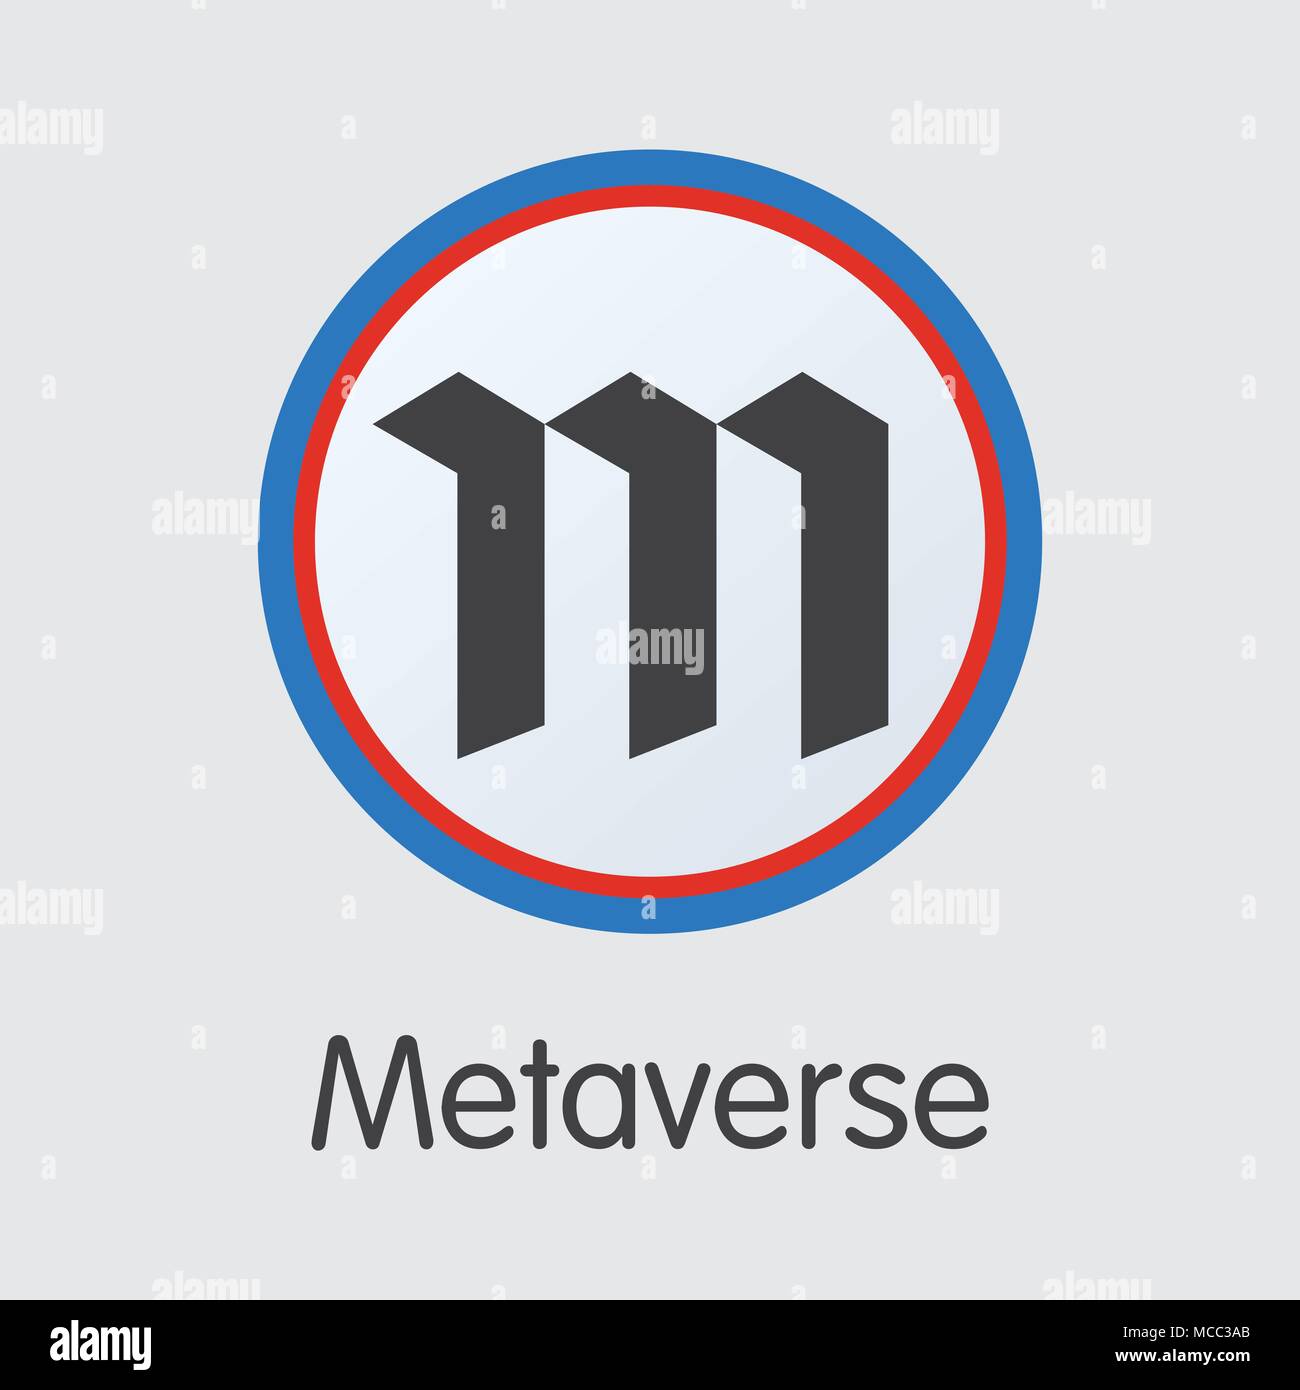 Metaverse - Crypto Currency Pictogram Symbol. Stock Vector